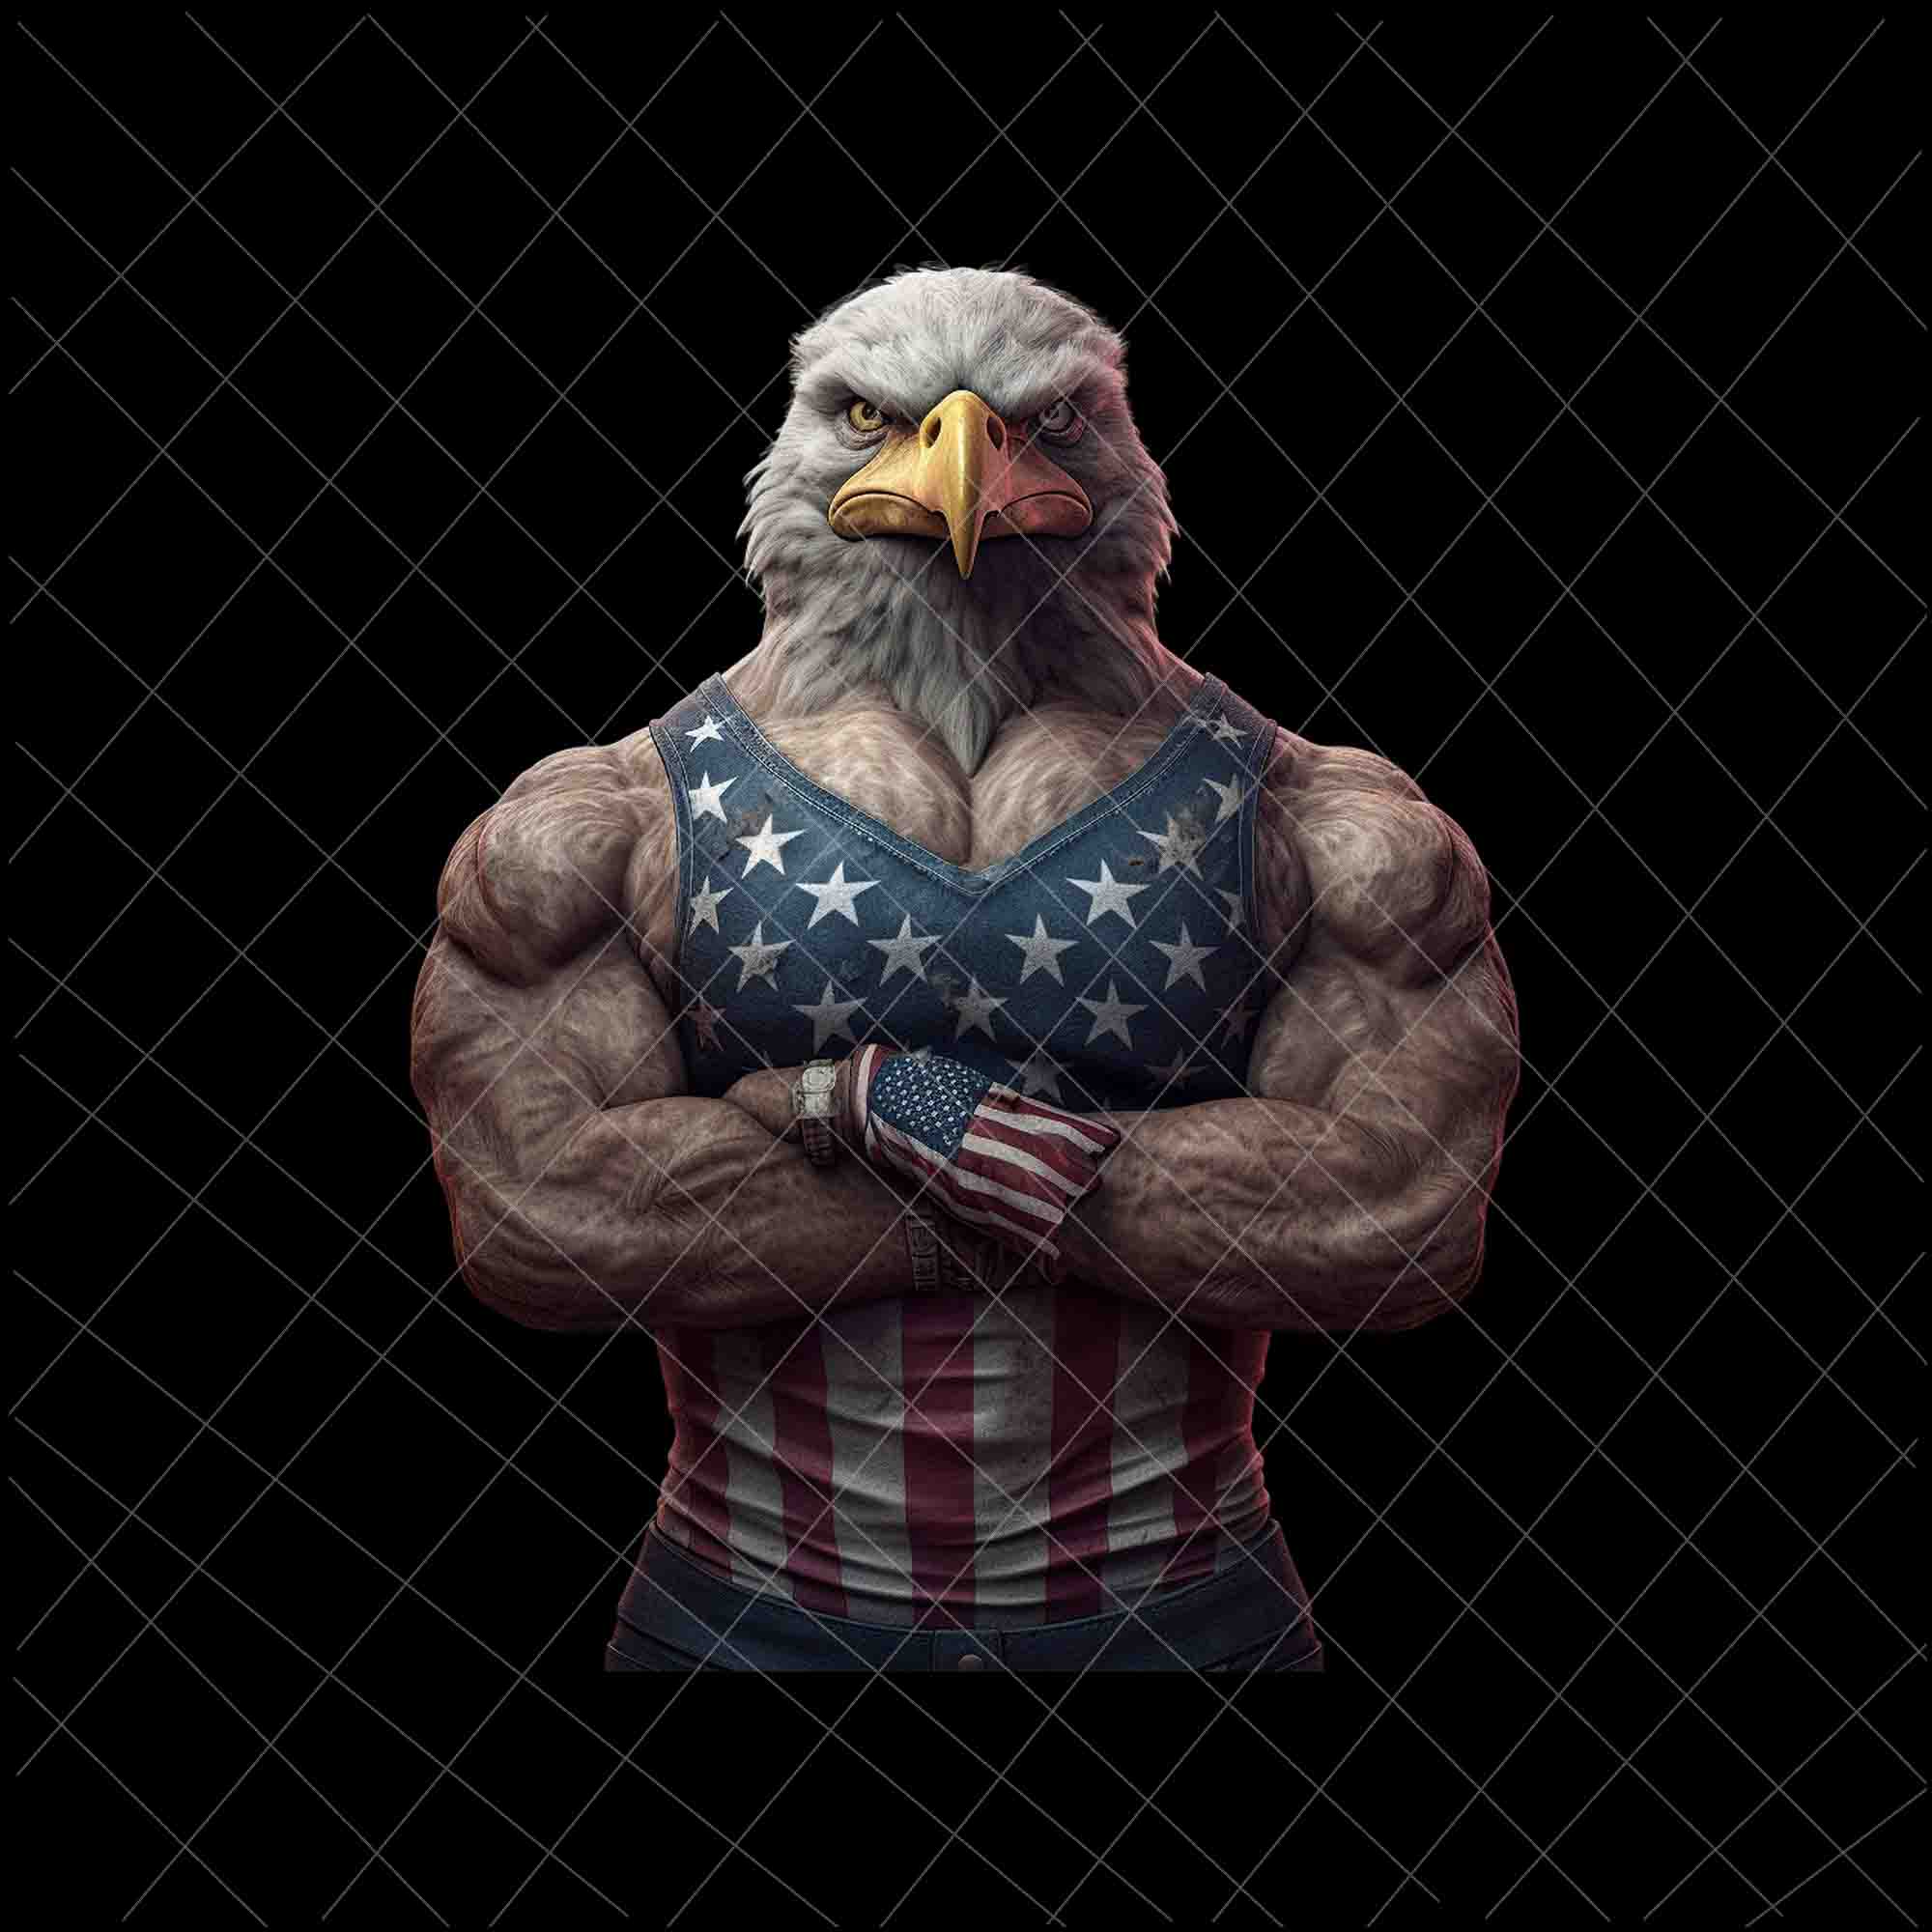 American Bald Eagle Mullet 4th Of July Png, American Eagle Gymer Png, Eagle 4th Of July Png, American Eagle USA Patriotic Png, Eagle Patriotic Day Png